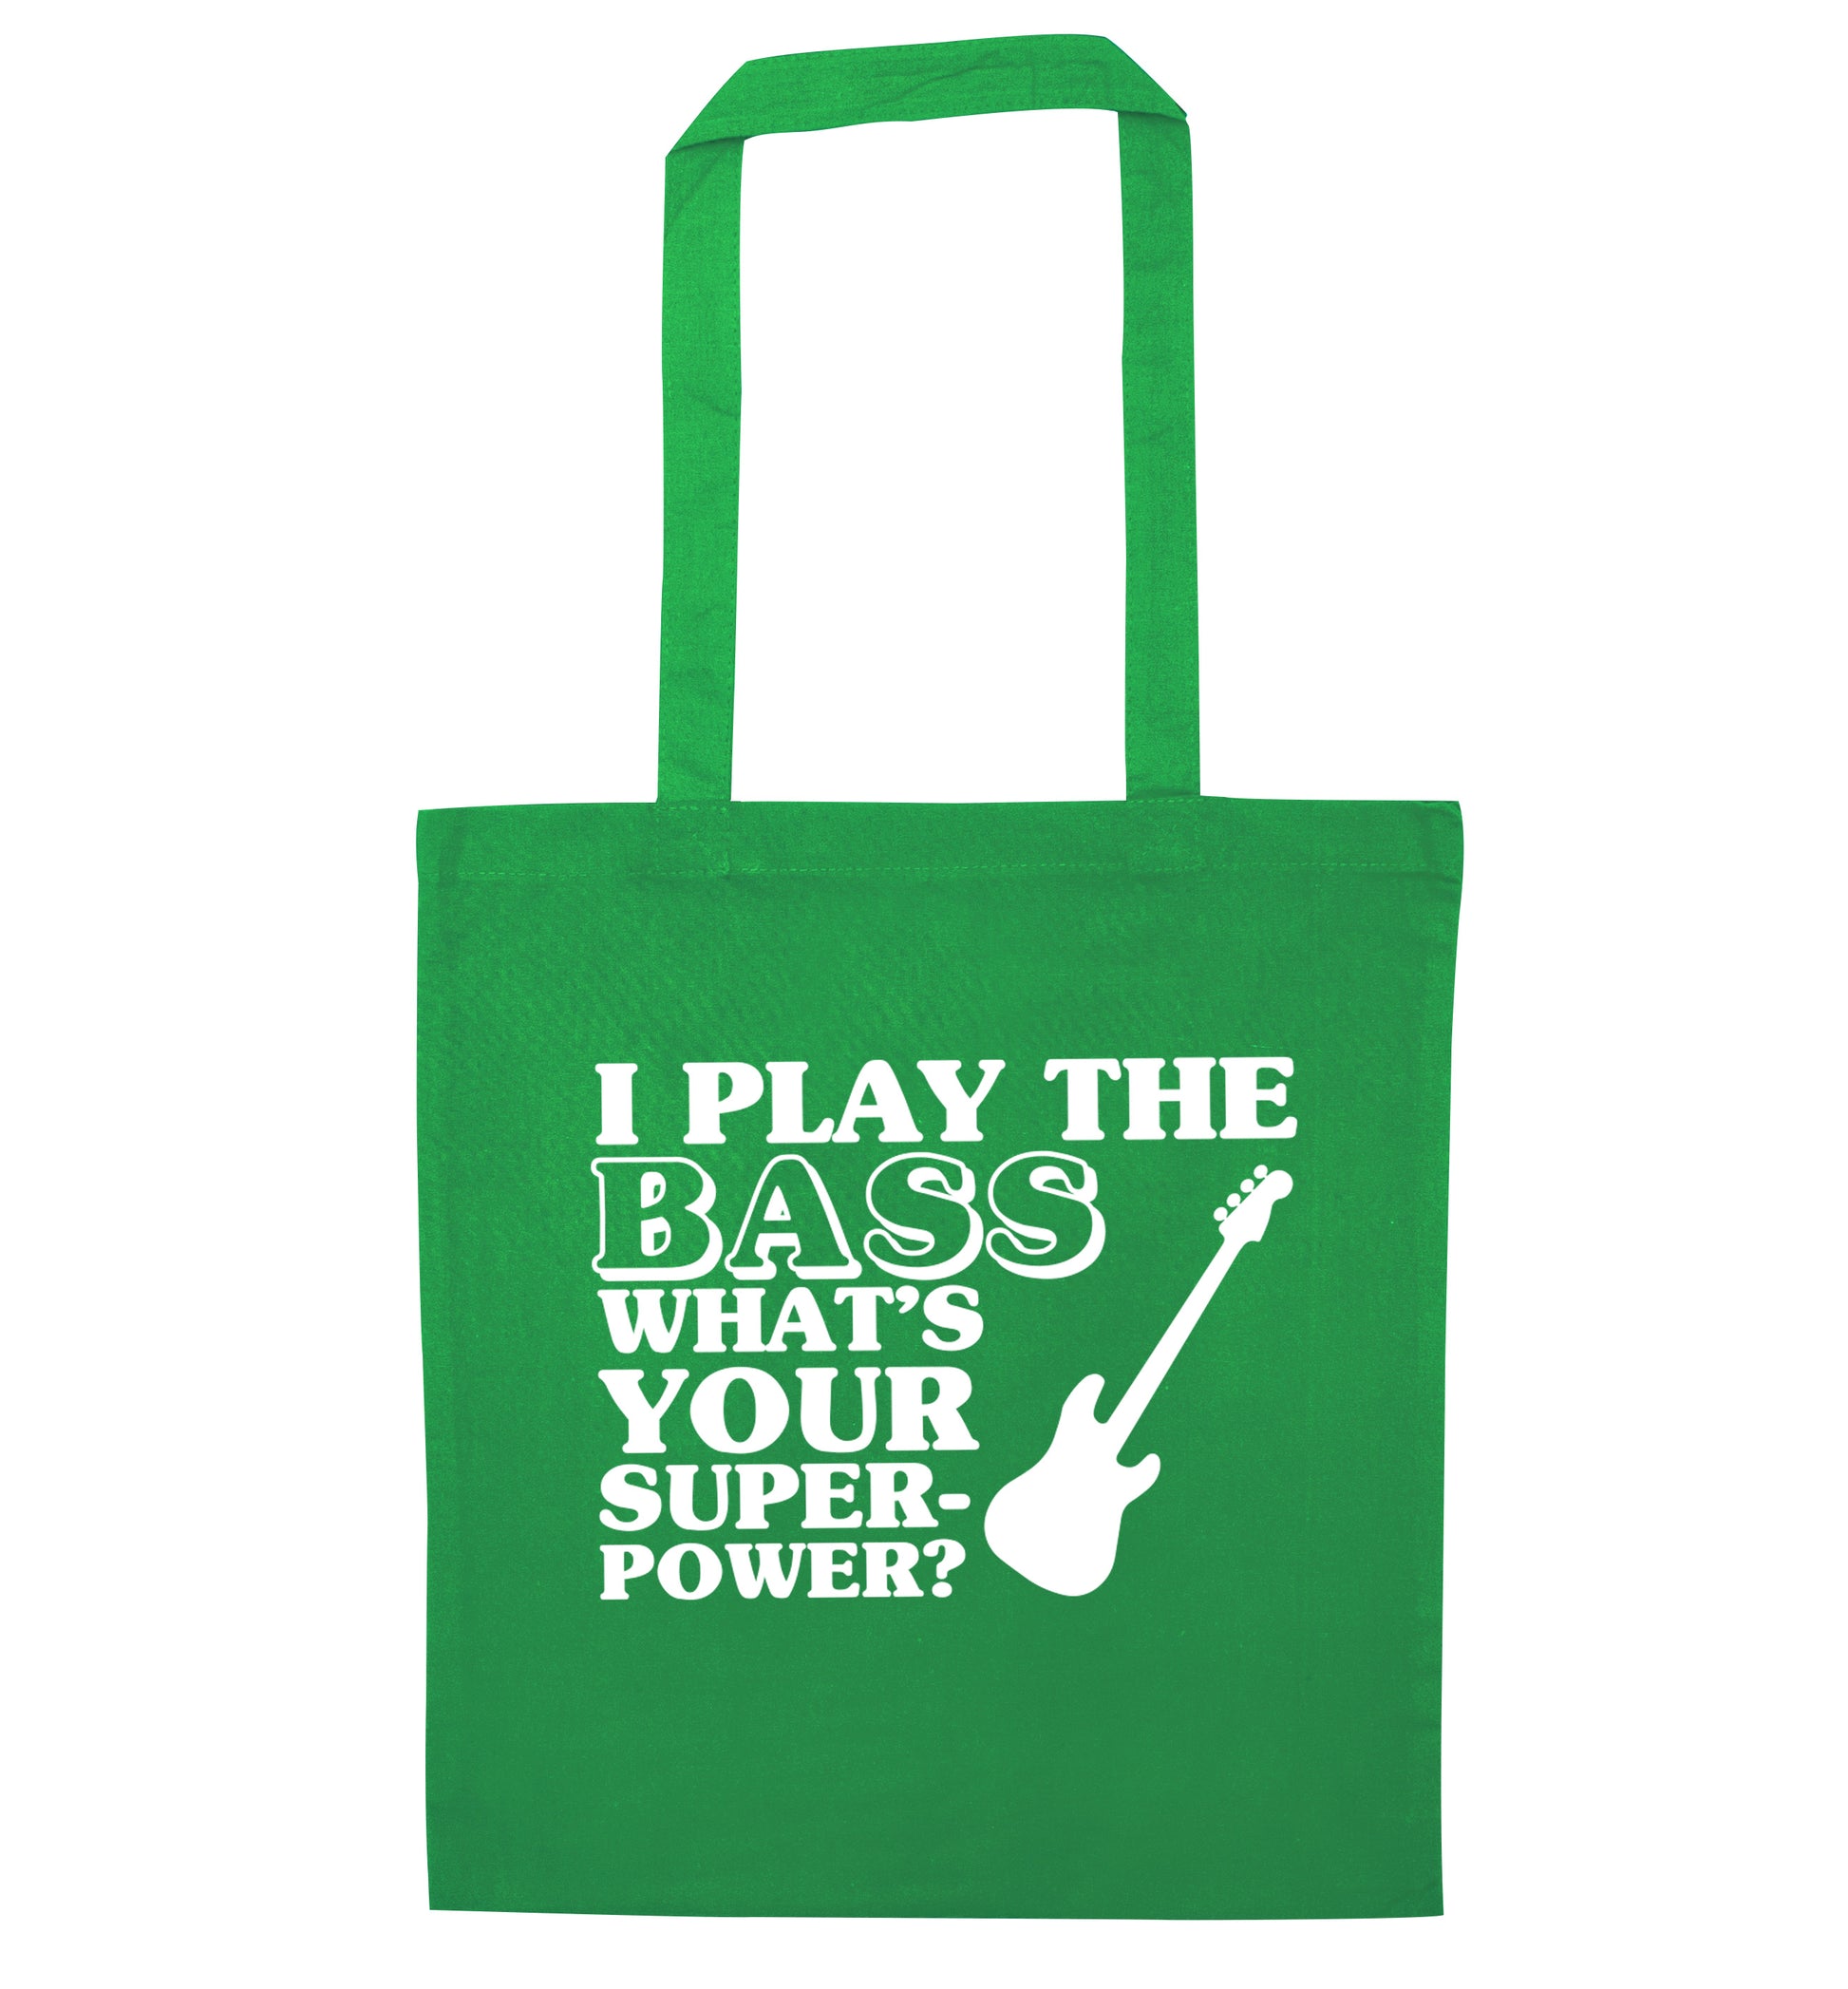 I play the bass what's your superpower? green tote bag